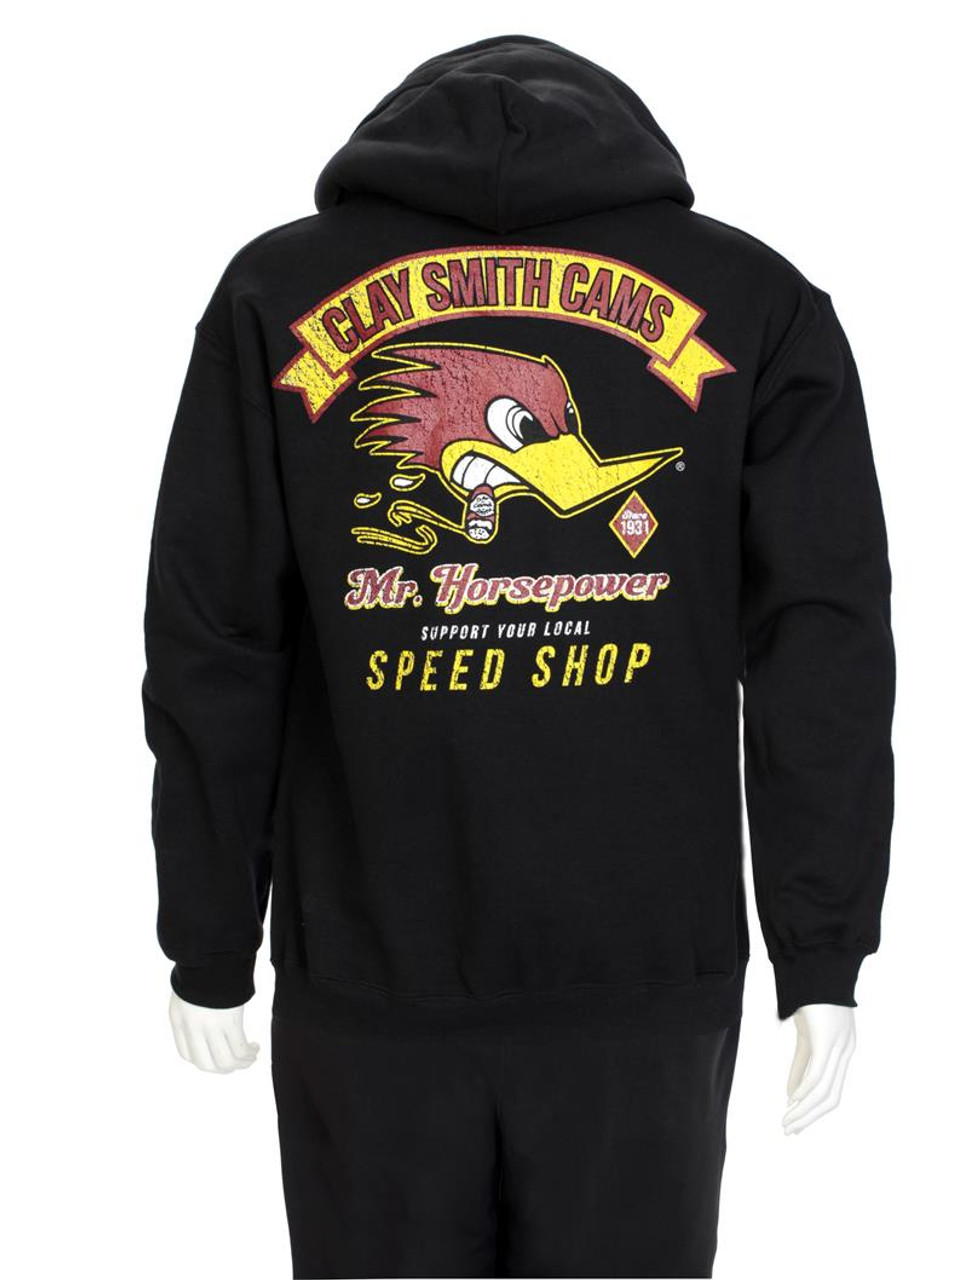 Support Your Local Speed Shop - Hooded Sweatshirt